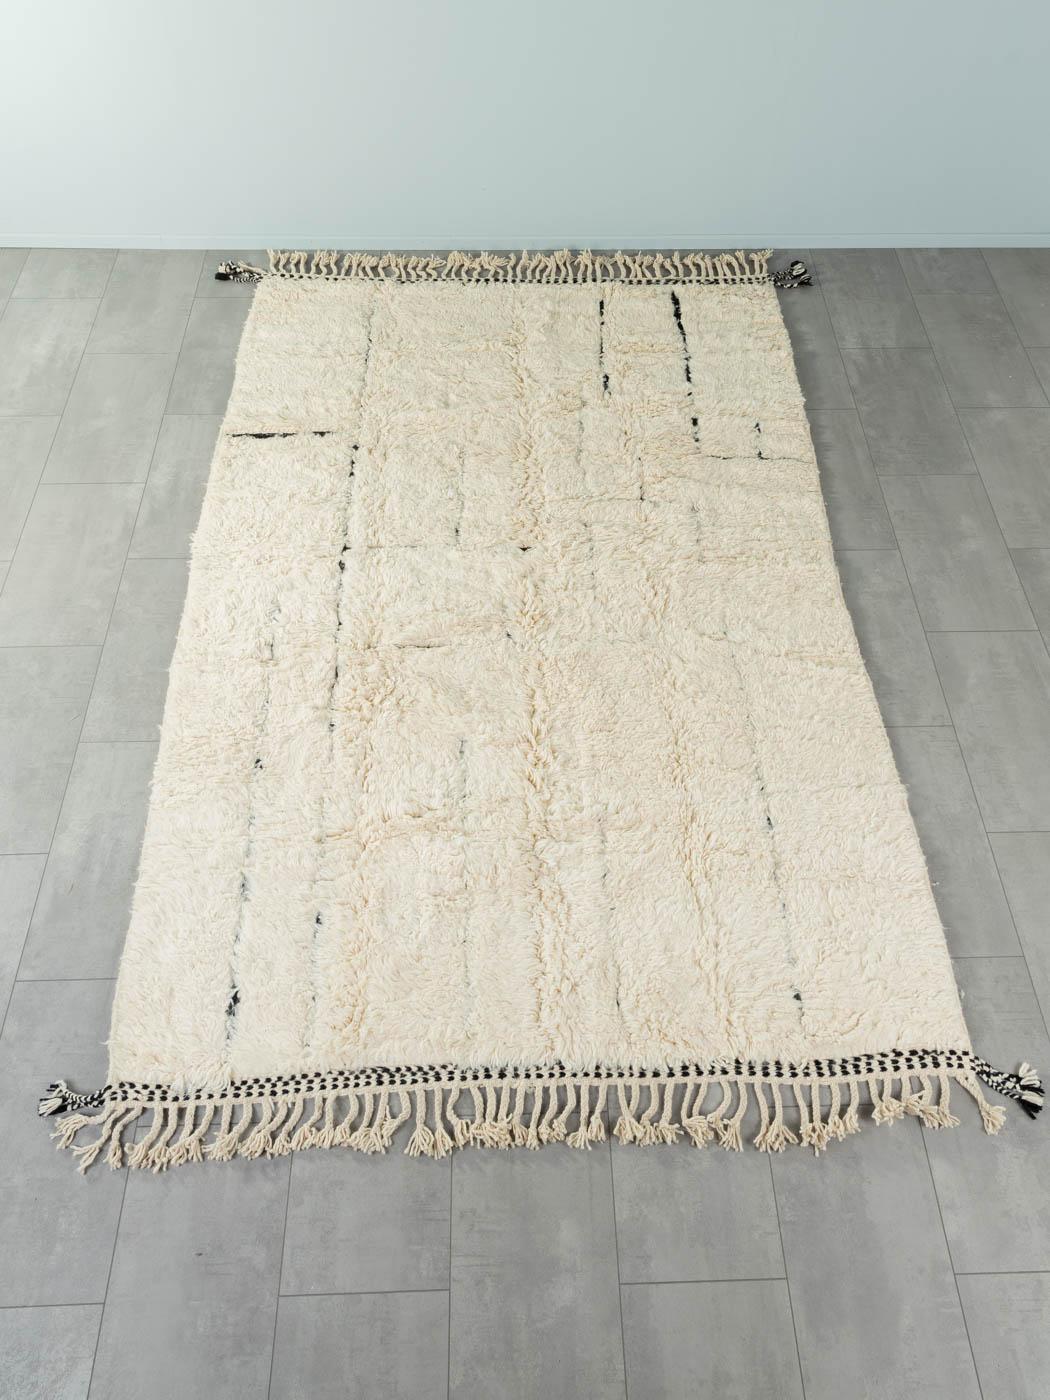 Daydream is a contemporary 100% wool rug – thick and soft, comfortable underfoot. Our Berber rugs are handwoven and handknotted by Amazigh women in the Atlas Mountains. These communities have been crafting rugs for thousands of years. One knot at a